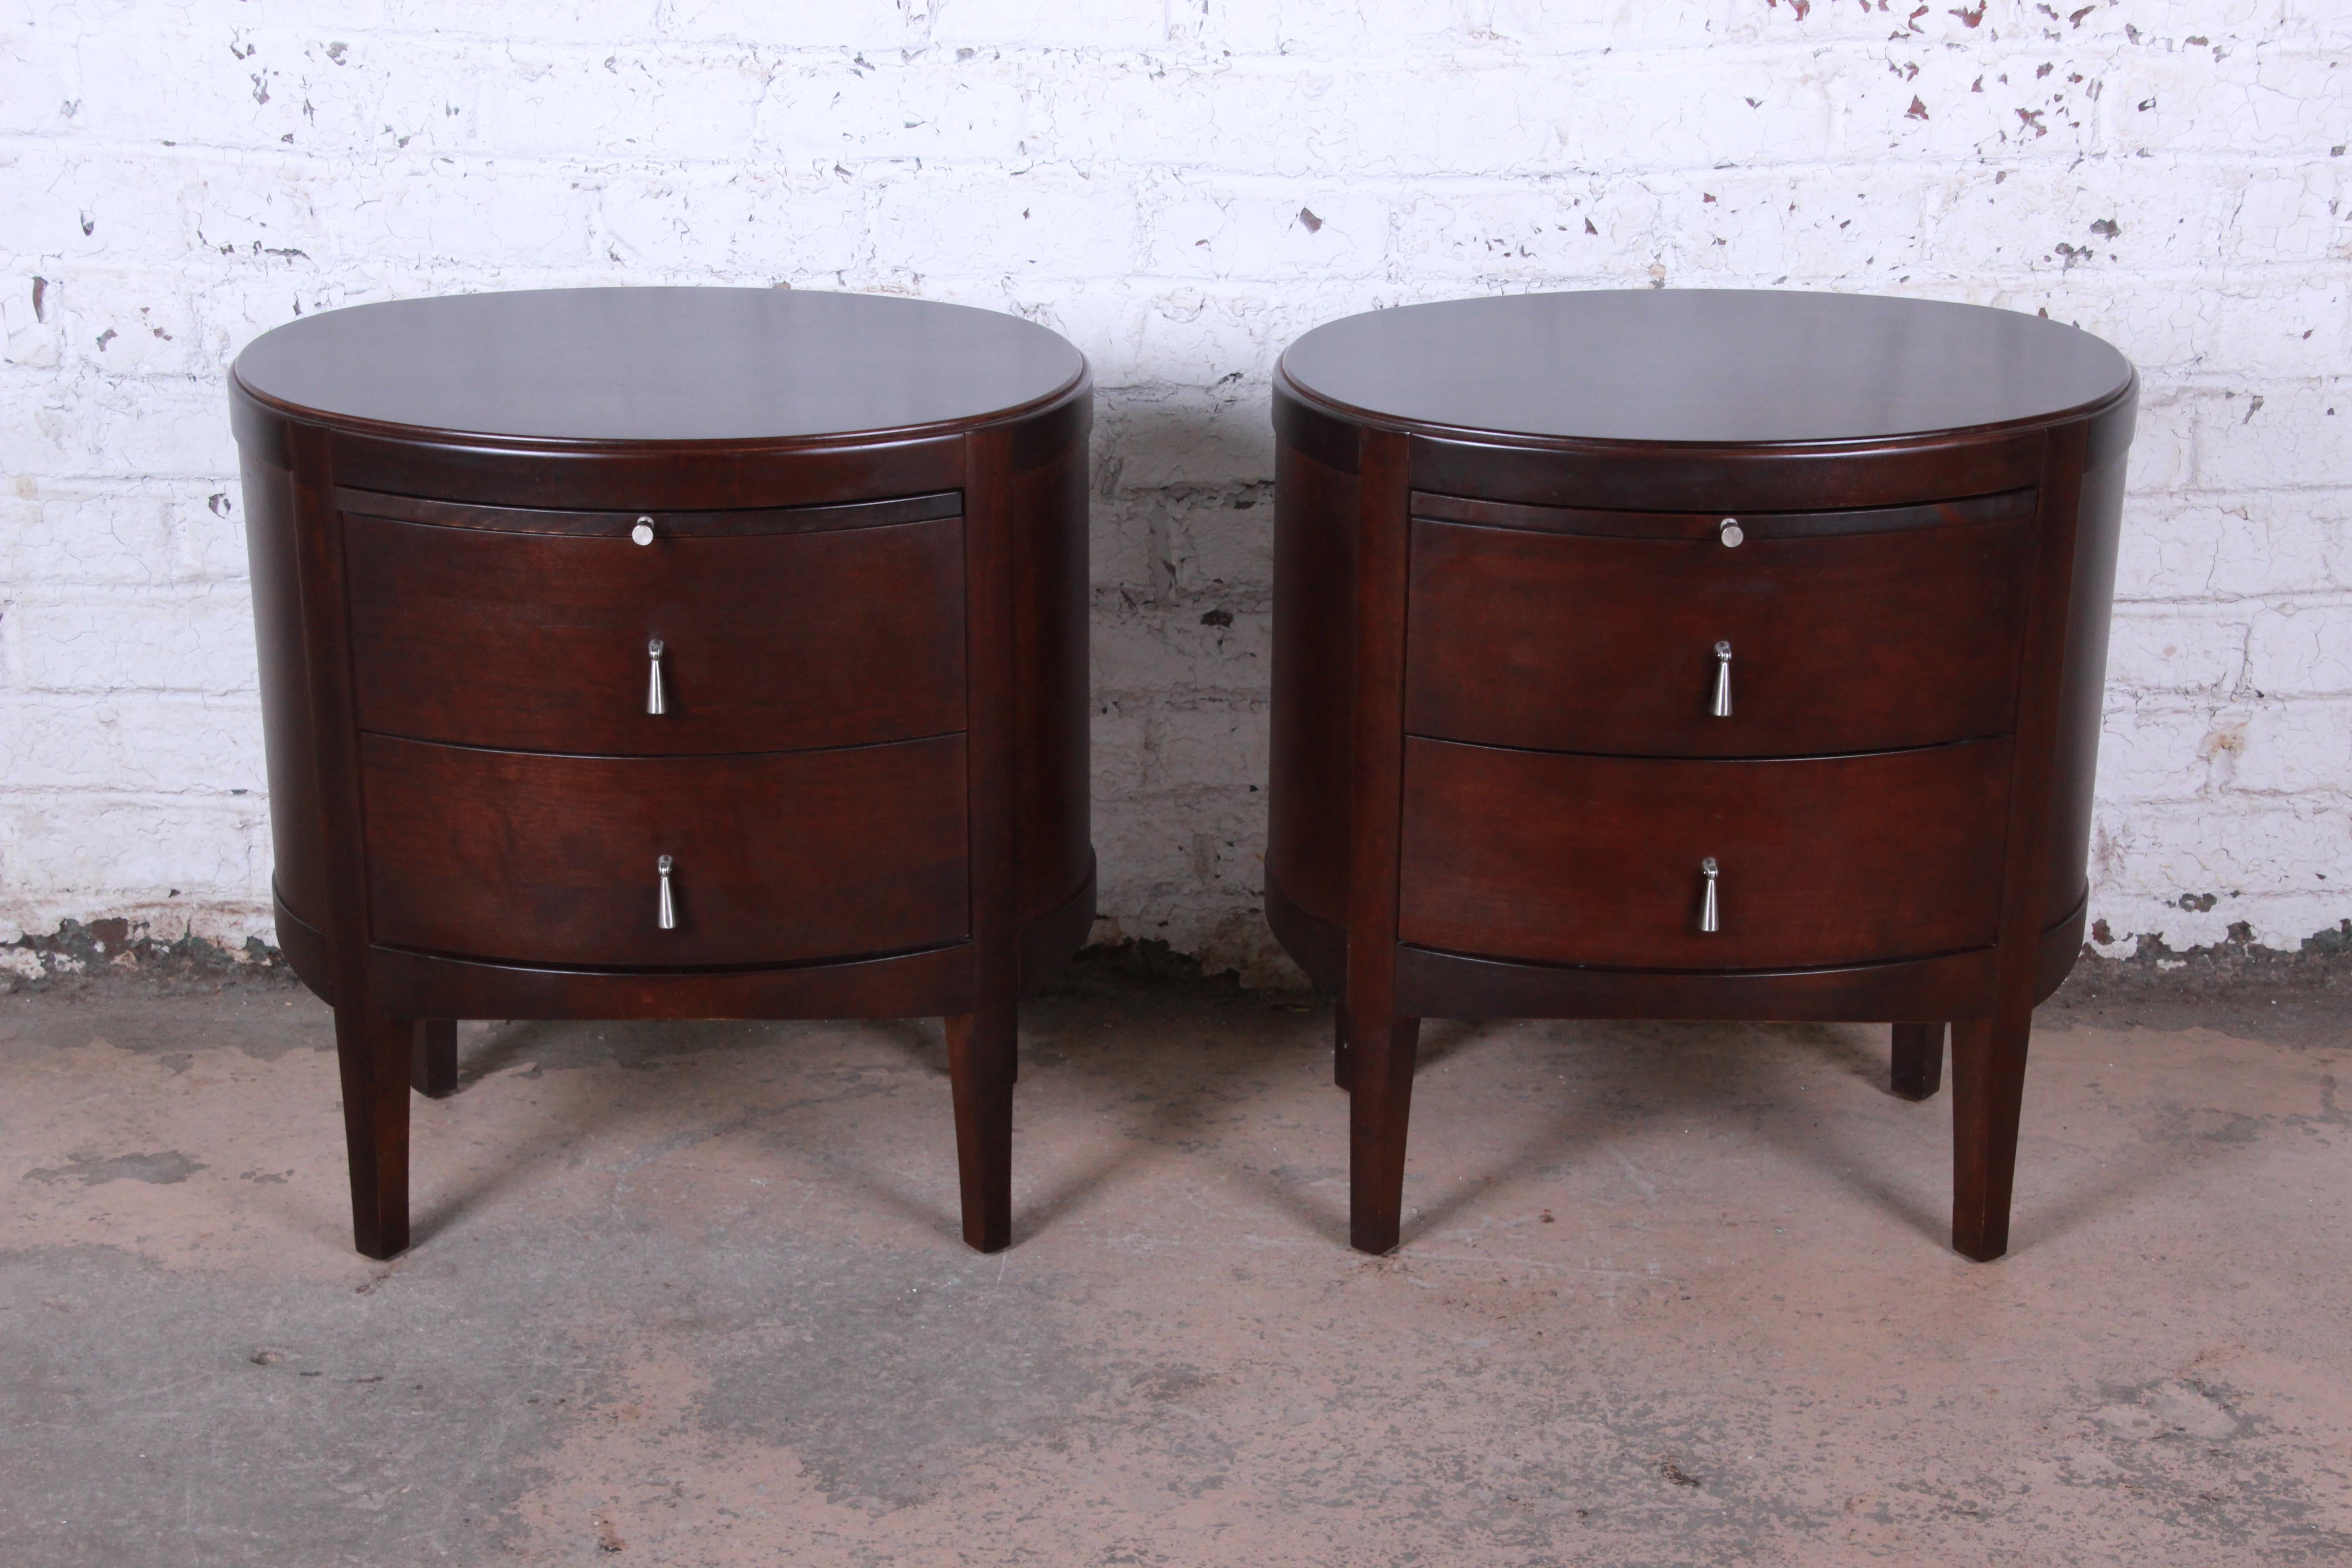 Offering a gorgeous pair of oval nightstands designed by Barbara Barry. The nightstands feature beautiful dark mahogany wood grain and nice contemporary design. They offer good storage, each with two deep drawers as well as a pull-out writing